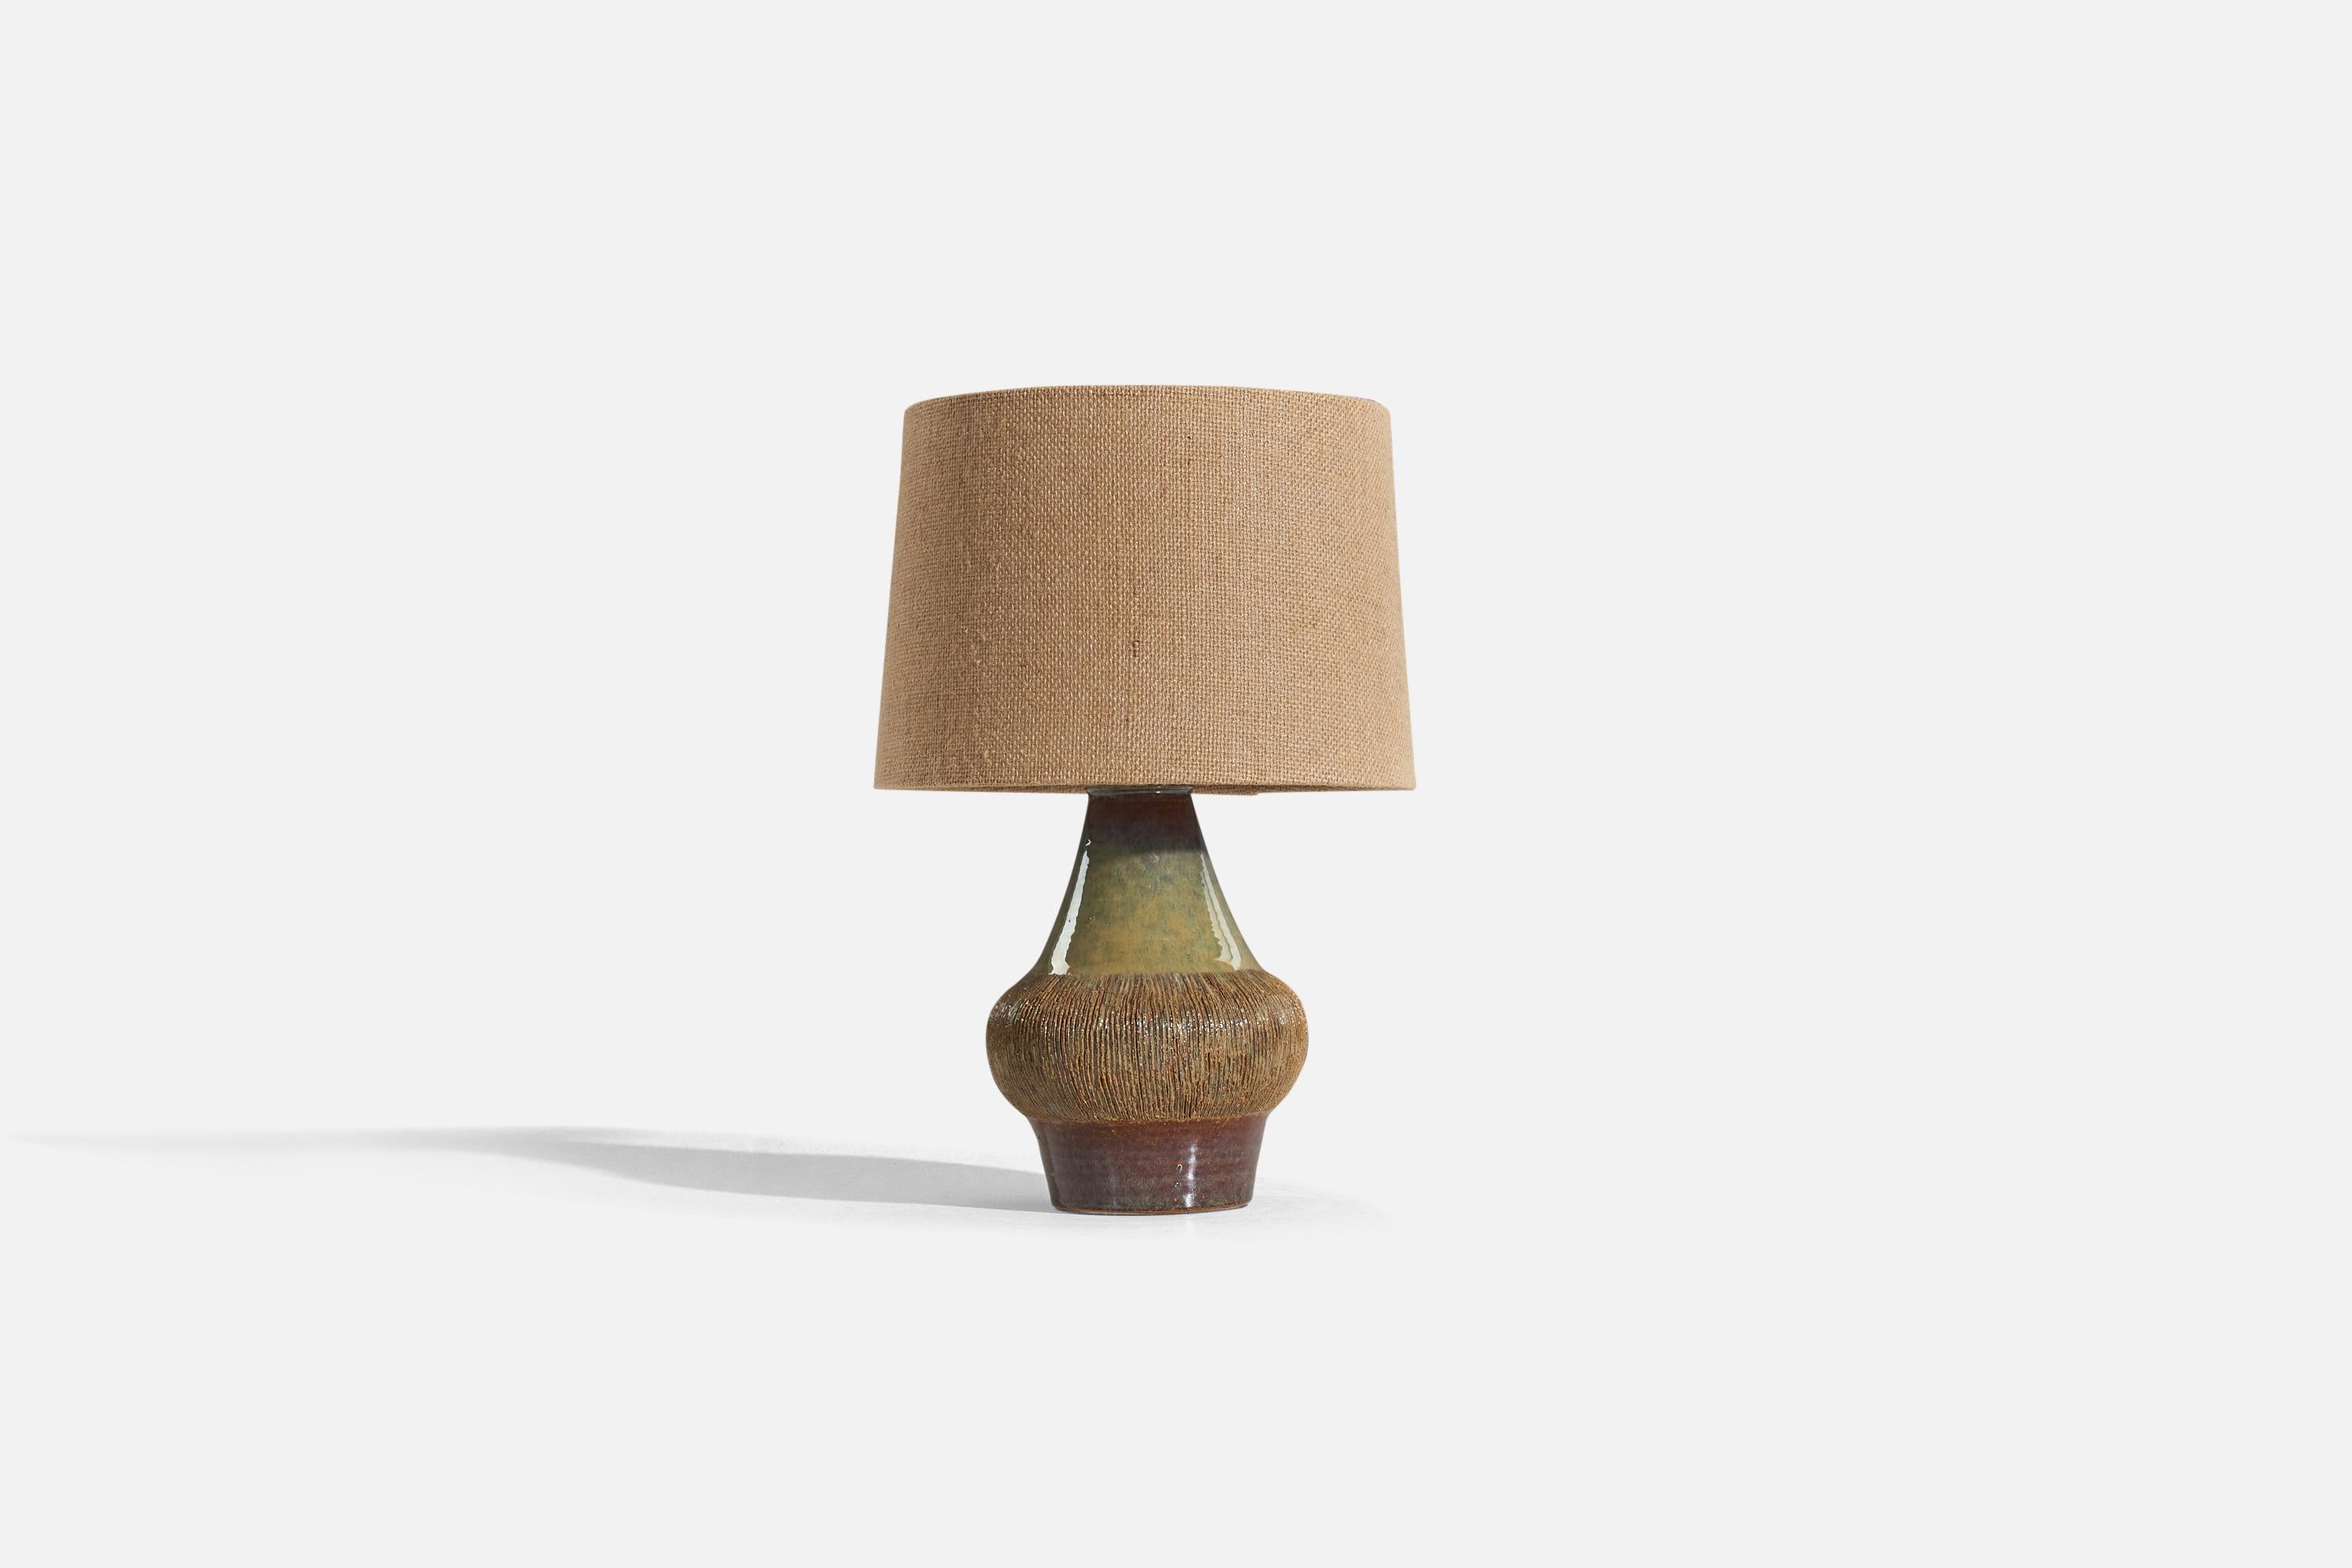 A green and brown, glazed stoneware table lamp designed and produced by Søholm Stentøj, Bornholm, Denmark, 1960s. 

Sold without lampshade. 
Dimensions of Lamp (inches) : 11.125 x 6.625 x 6.625 (H x W x D)
Dimensions of Shade (inches) : 7.1875 x